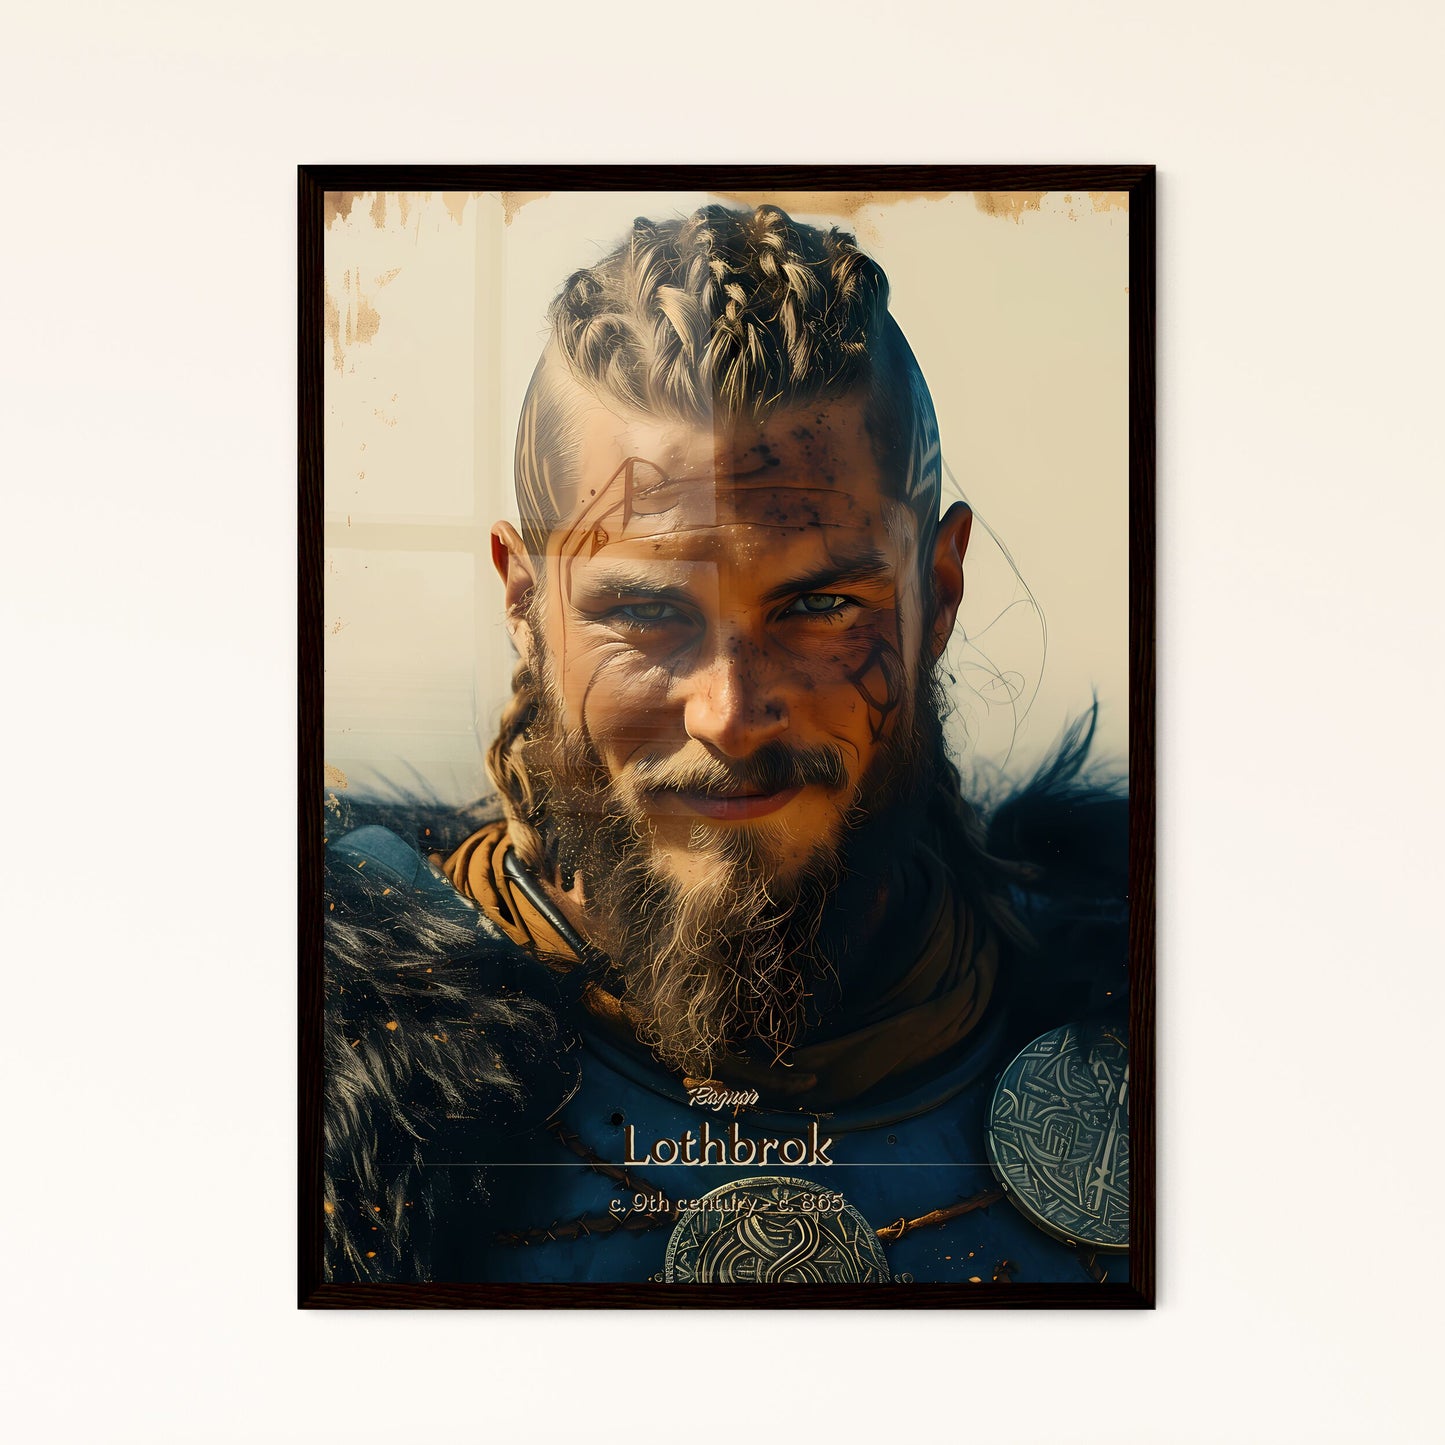 Ragnar, Lothbrok, c. 9th century - c. 865, A Poster of a man with a beard and a beard with a beard and a mohawk Default Title